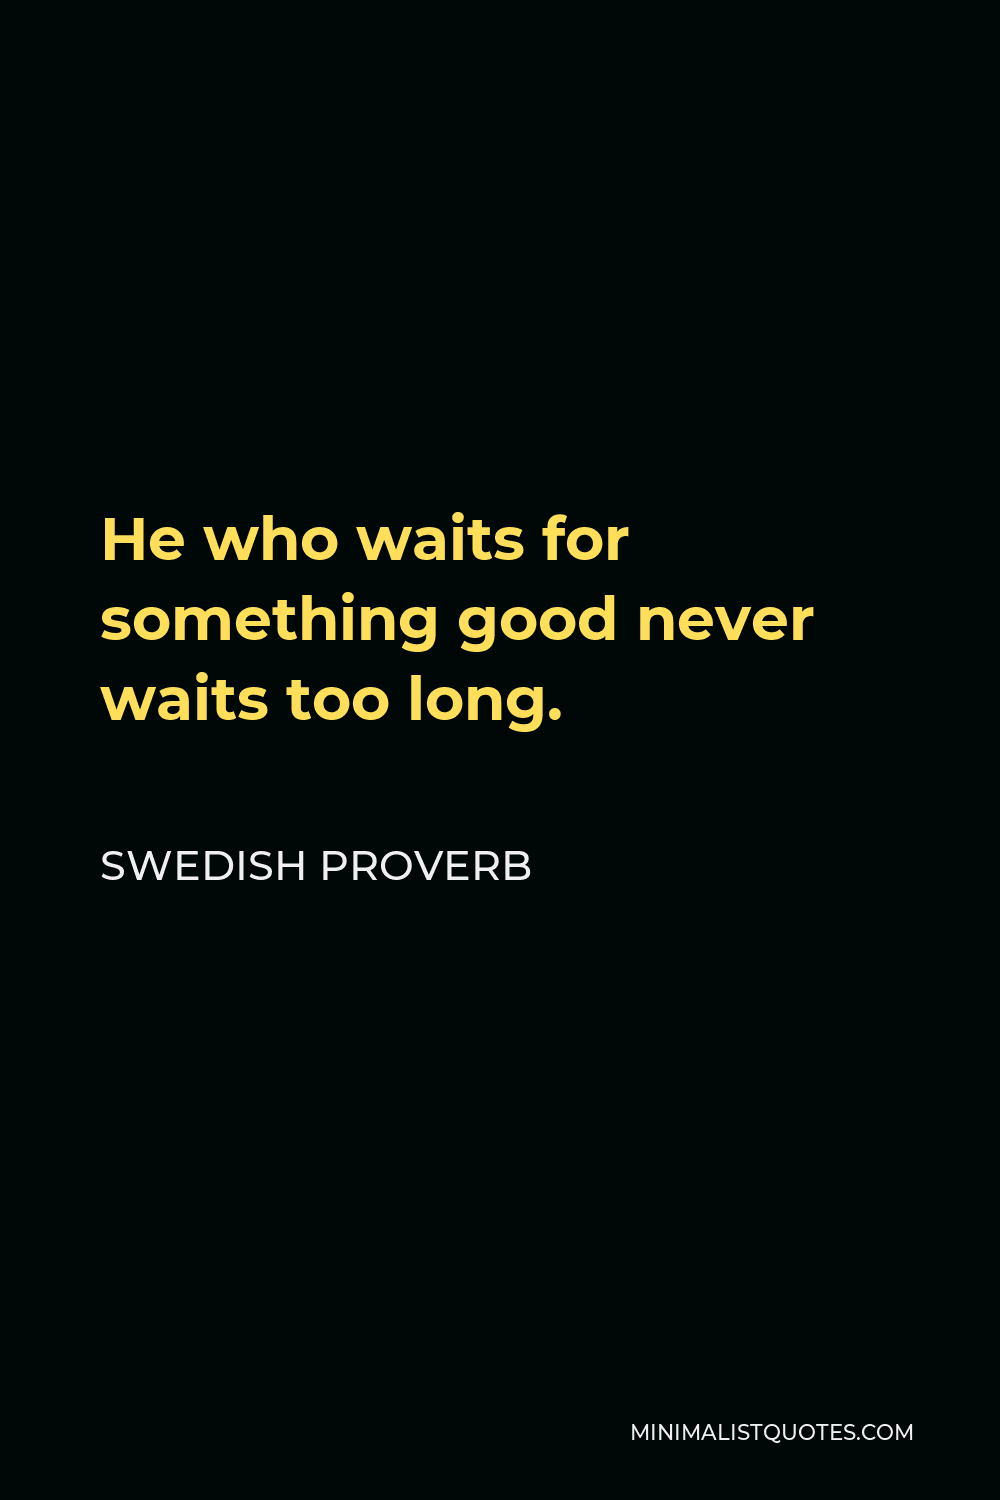 Swedish Proverb Quote - He who waits for something good never waits too long.